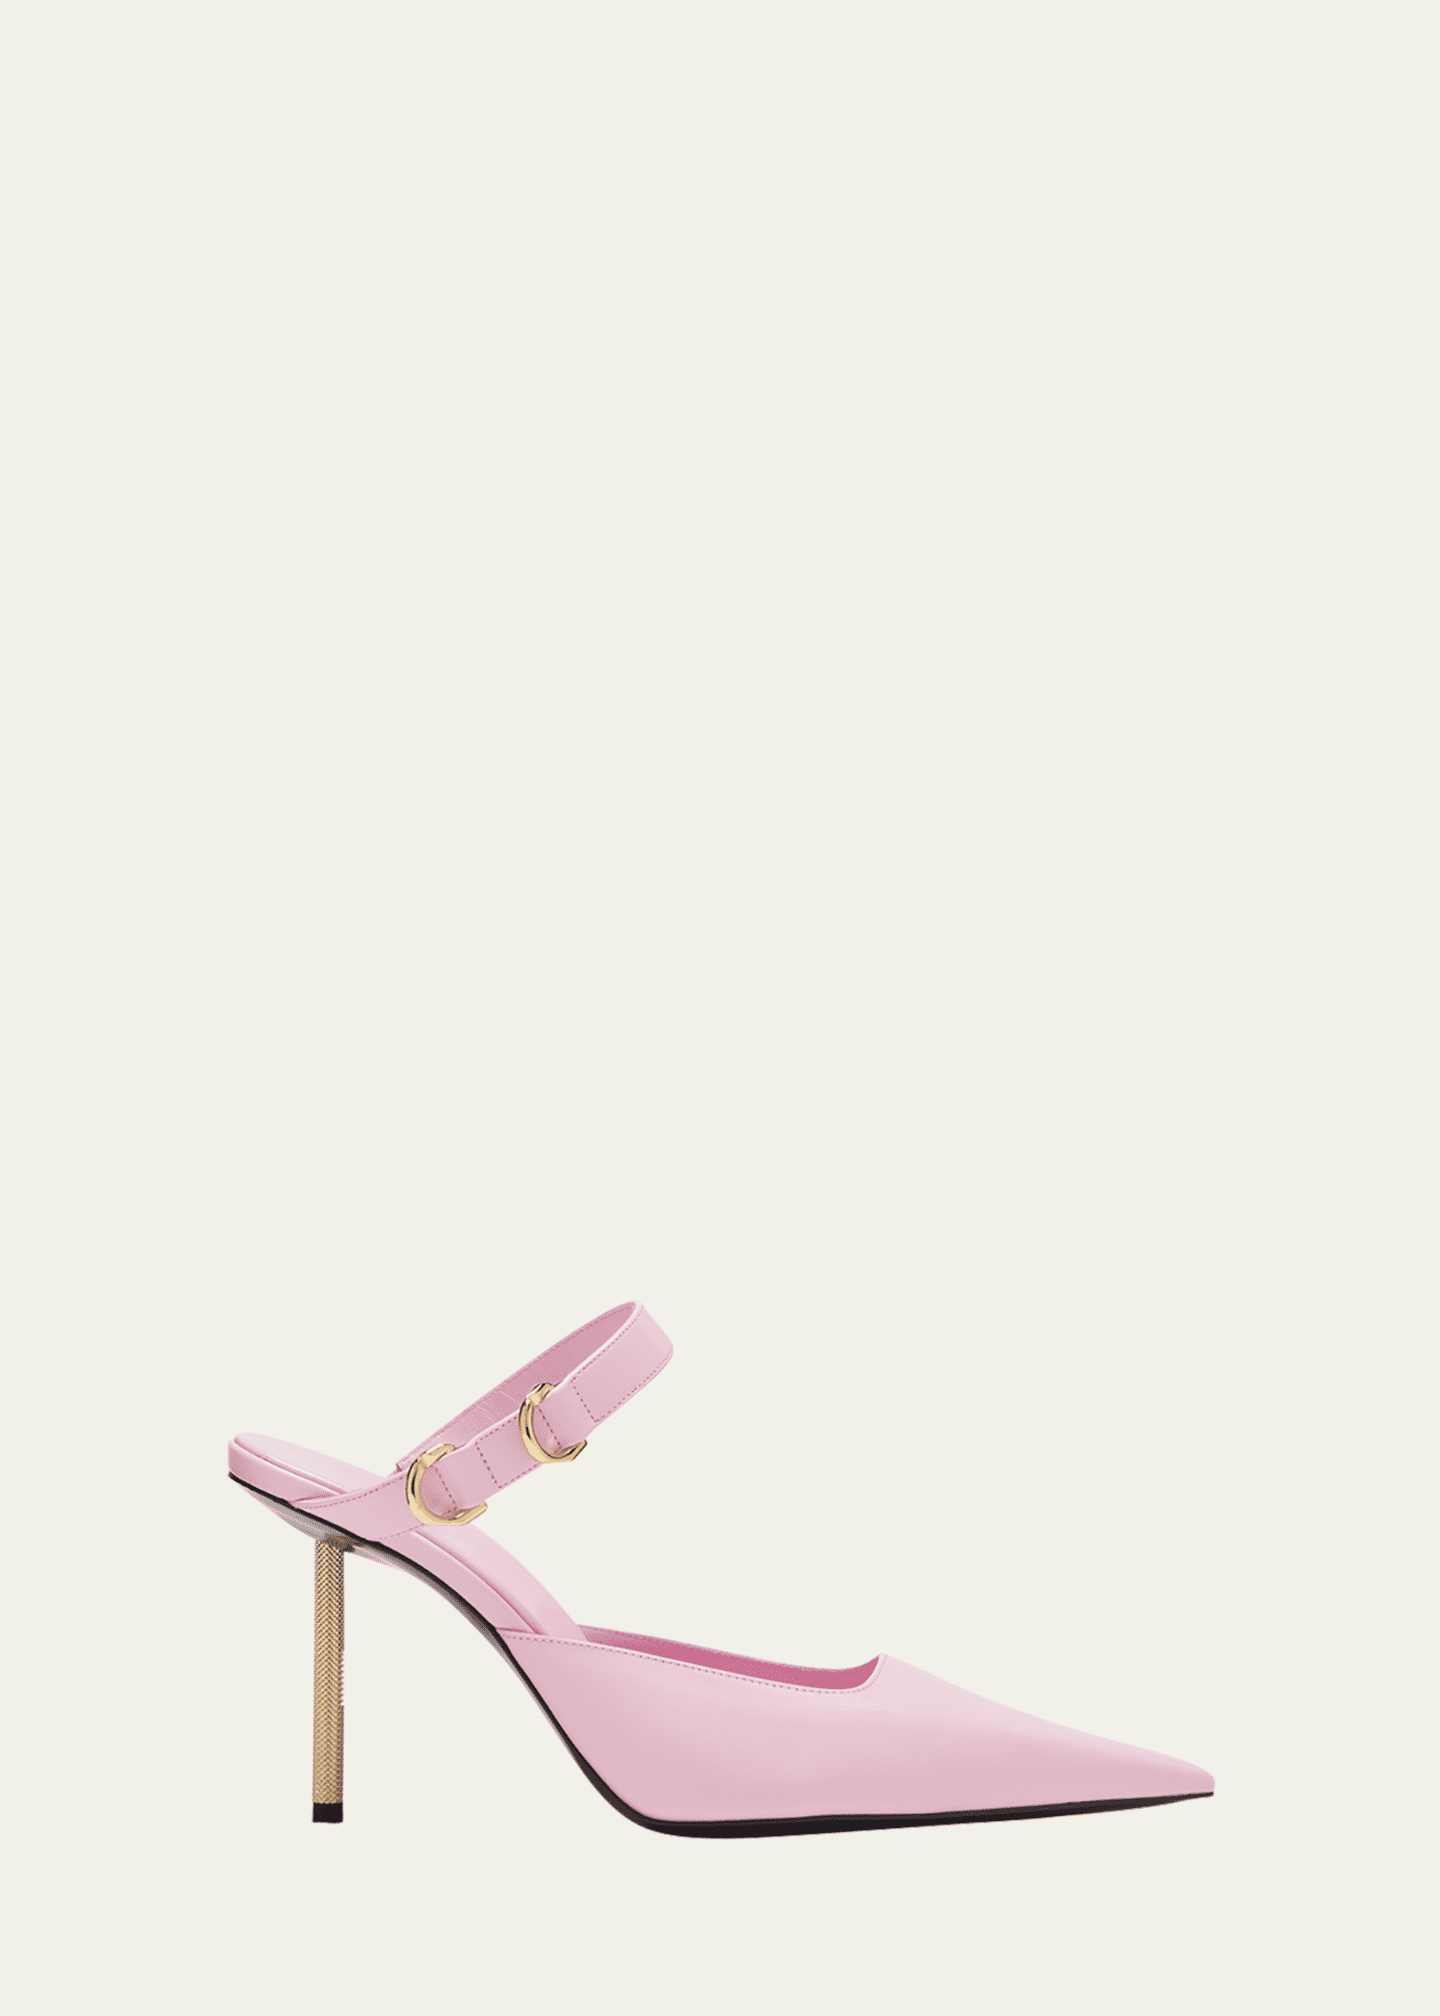 Givenchy Voyou Buckle Mule Pumps - Bergdorf Goodman